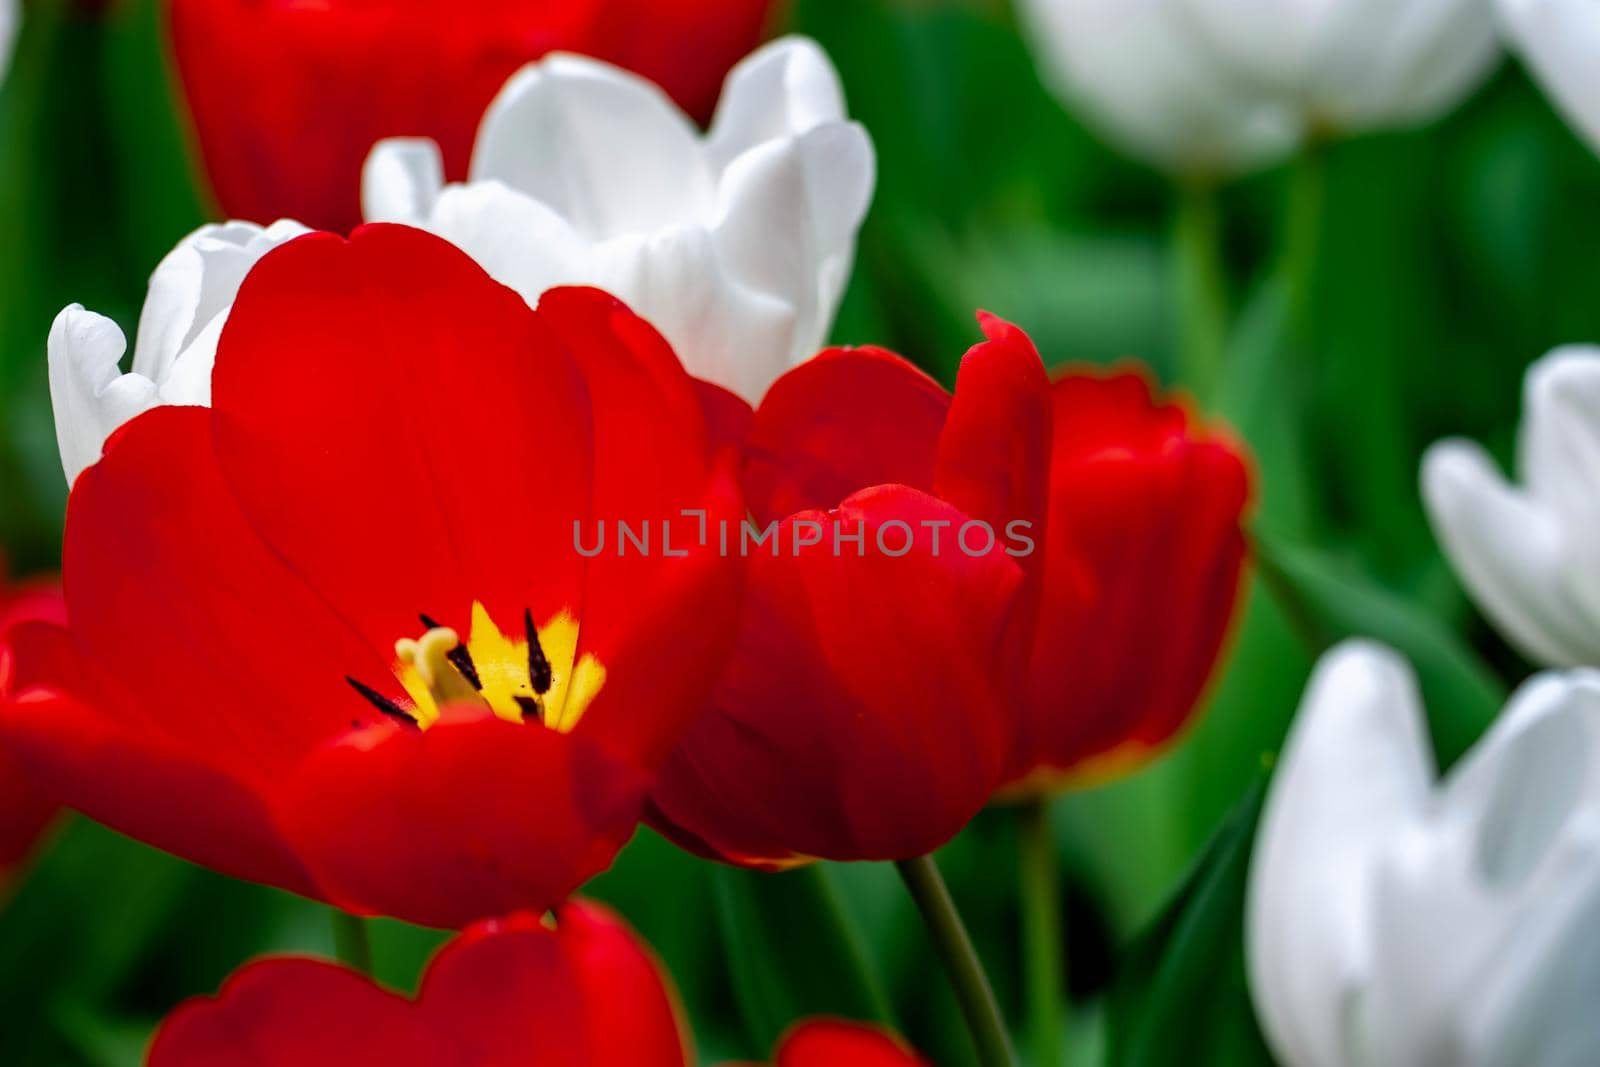 Red tulips with green blurry background by billroque